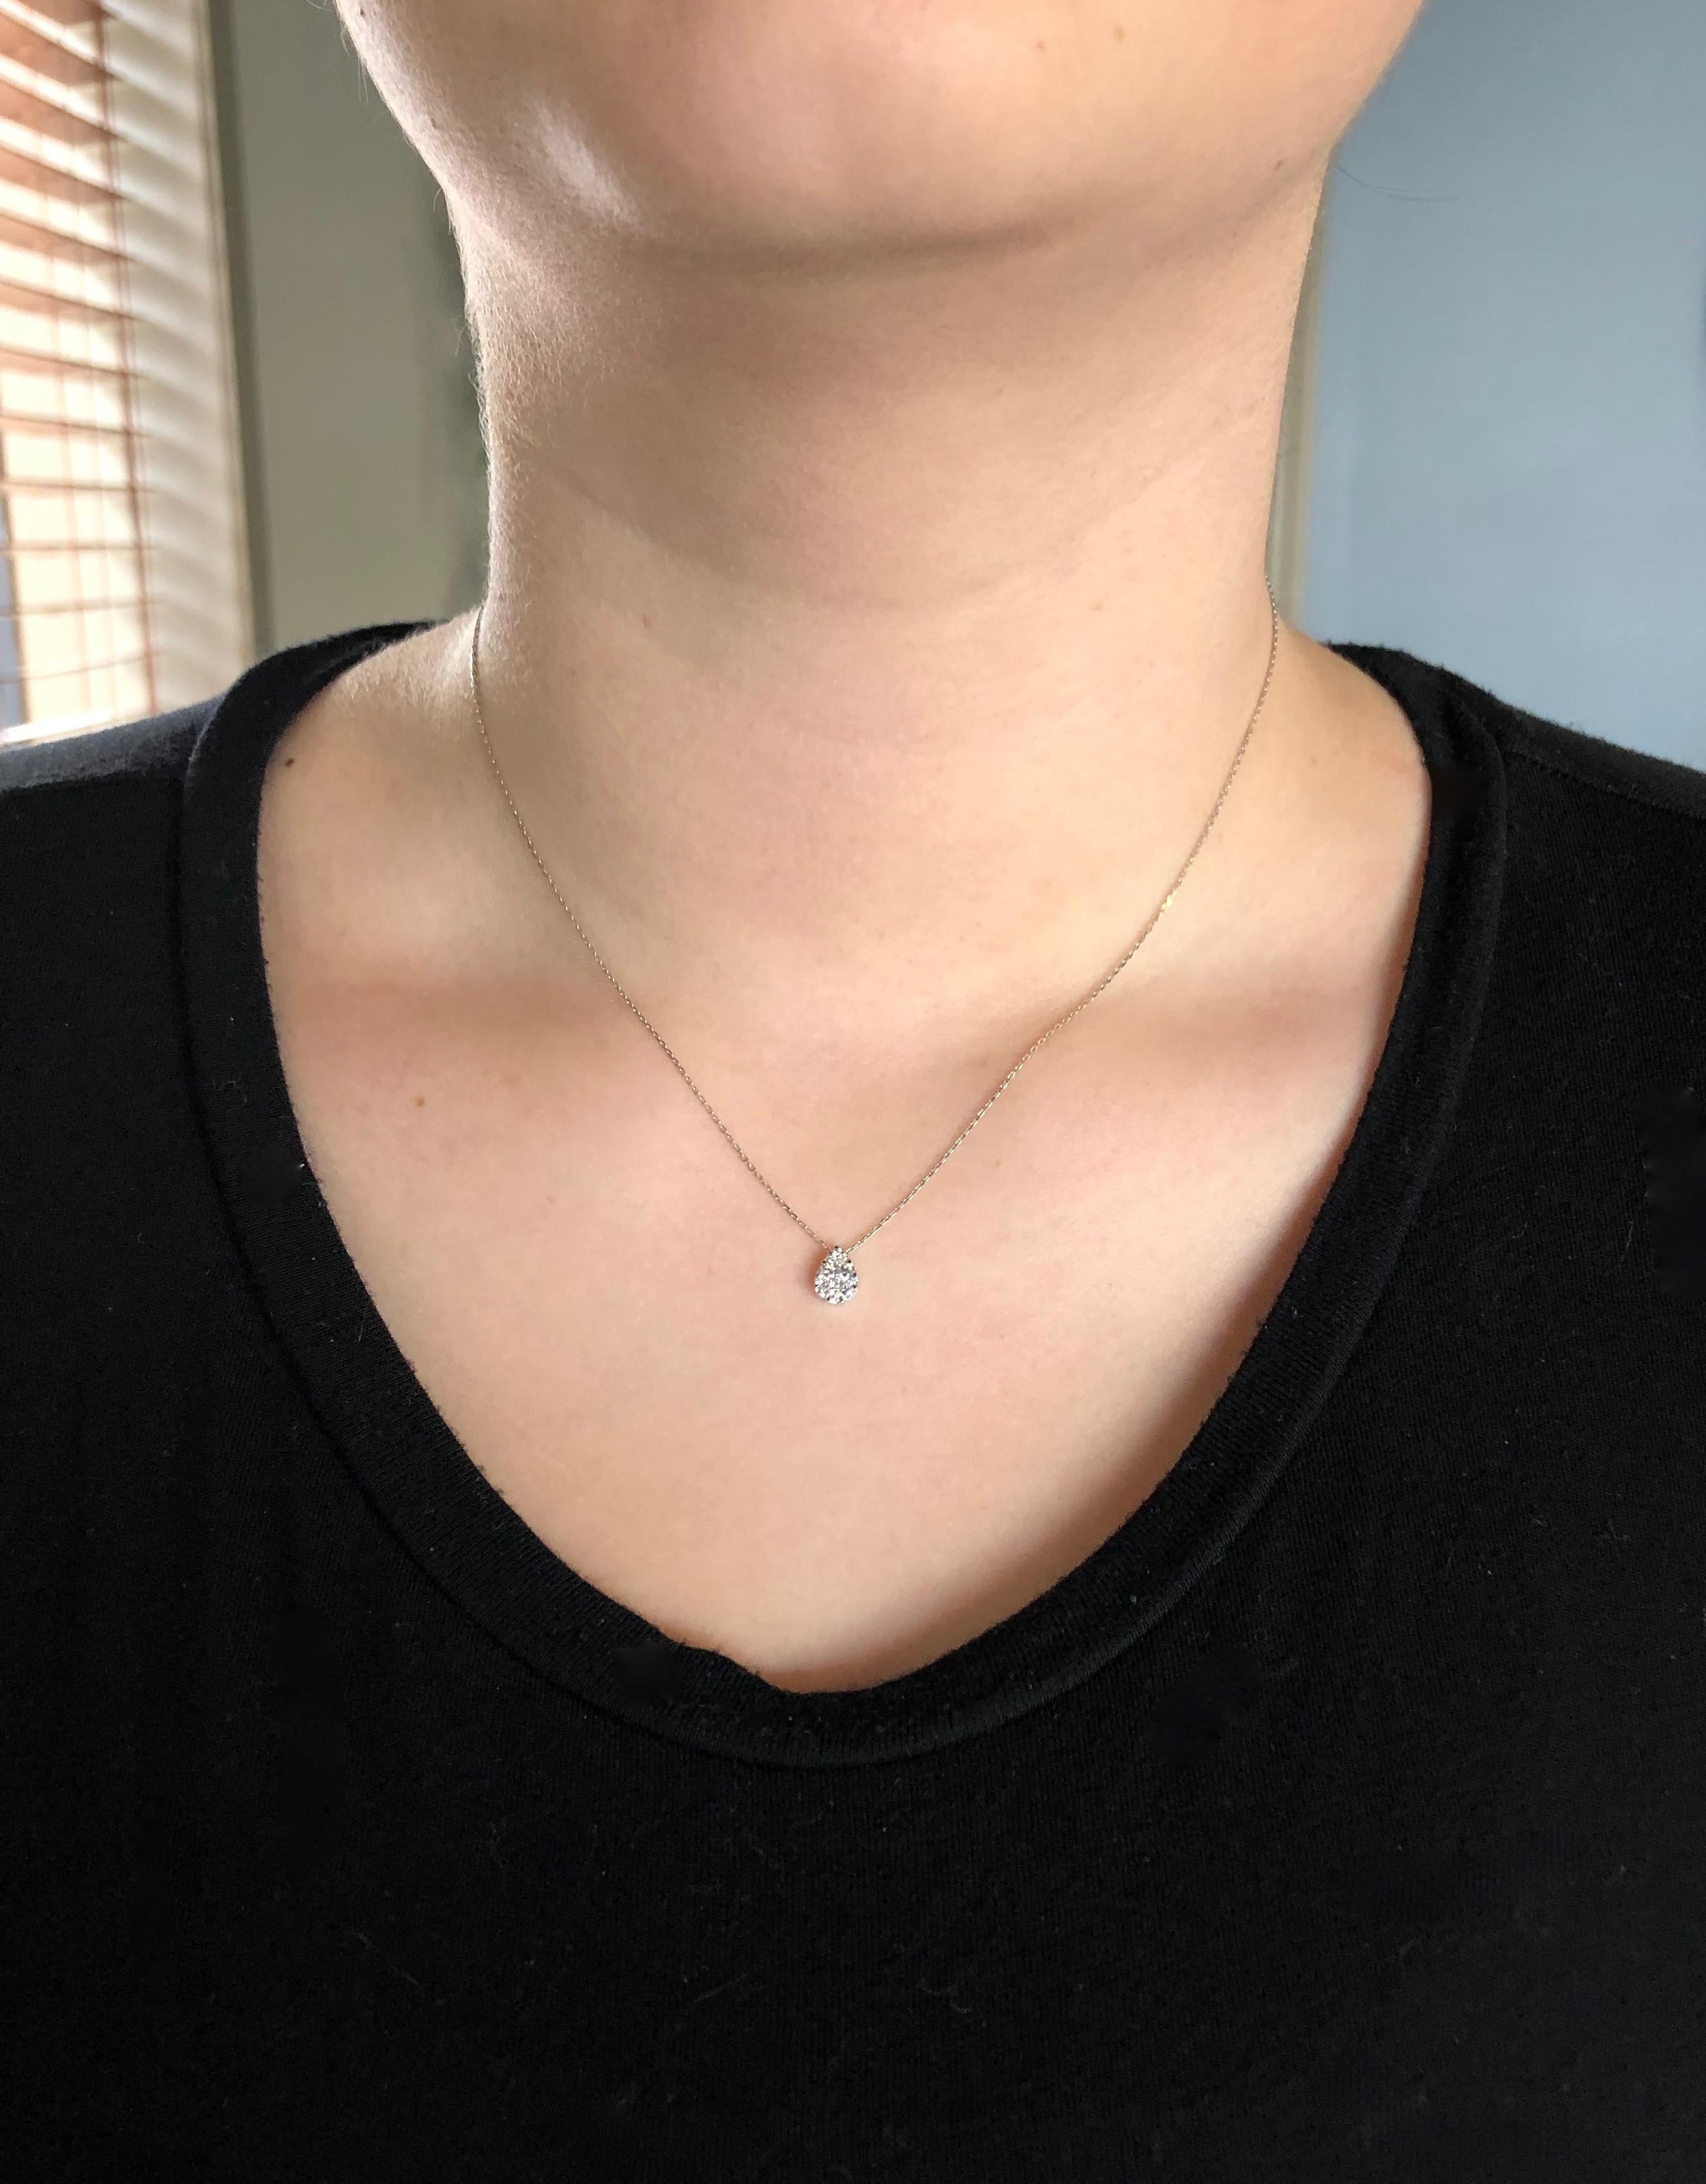 Pear shaped Diamond necklace is encrusted with .25CTW of Round Brilliant Cut Diamonds. The diamonds have G color and SI clarity.  This 14K white gold necklace is new and weighs 1.66 grams and is 17” in length.